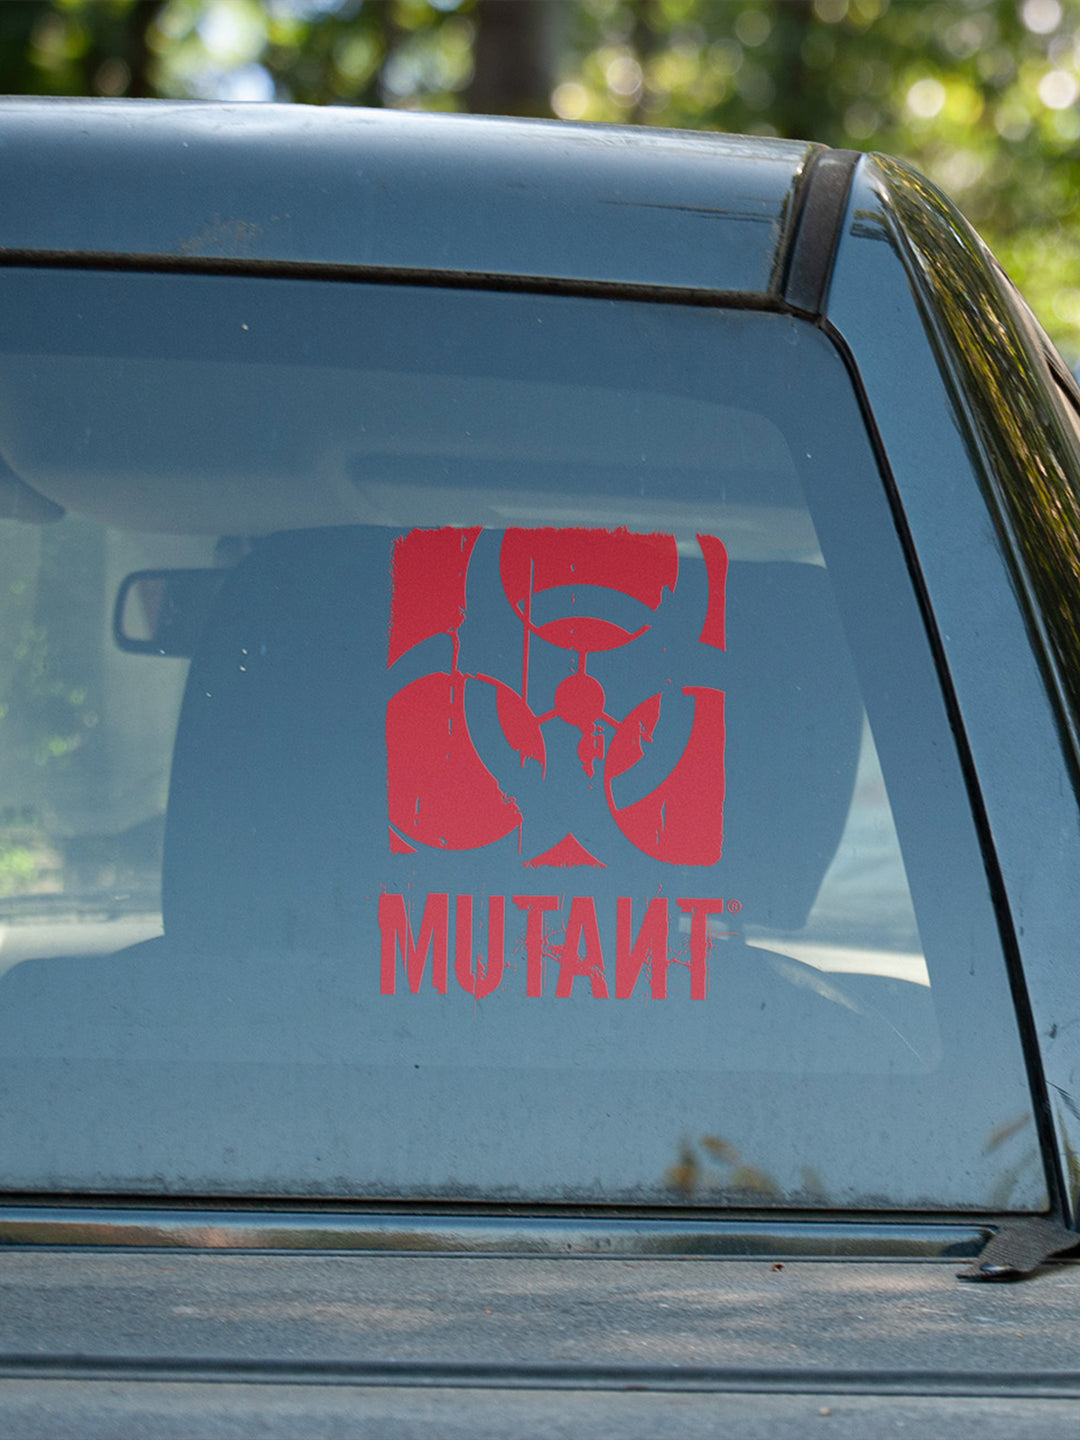 A photo showing the Rugged Truck Window Decal, which features the MUTANT logo in red, applied to the rear glass of a truck.